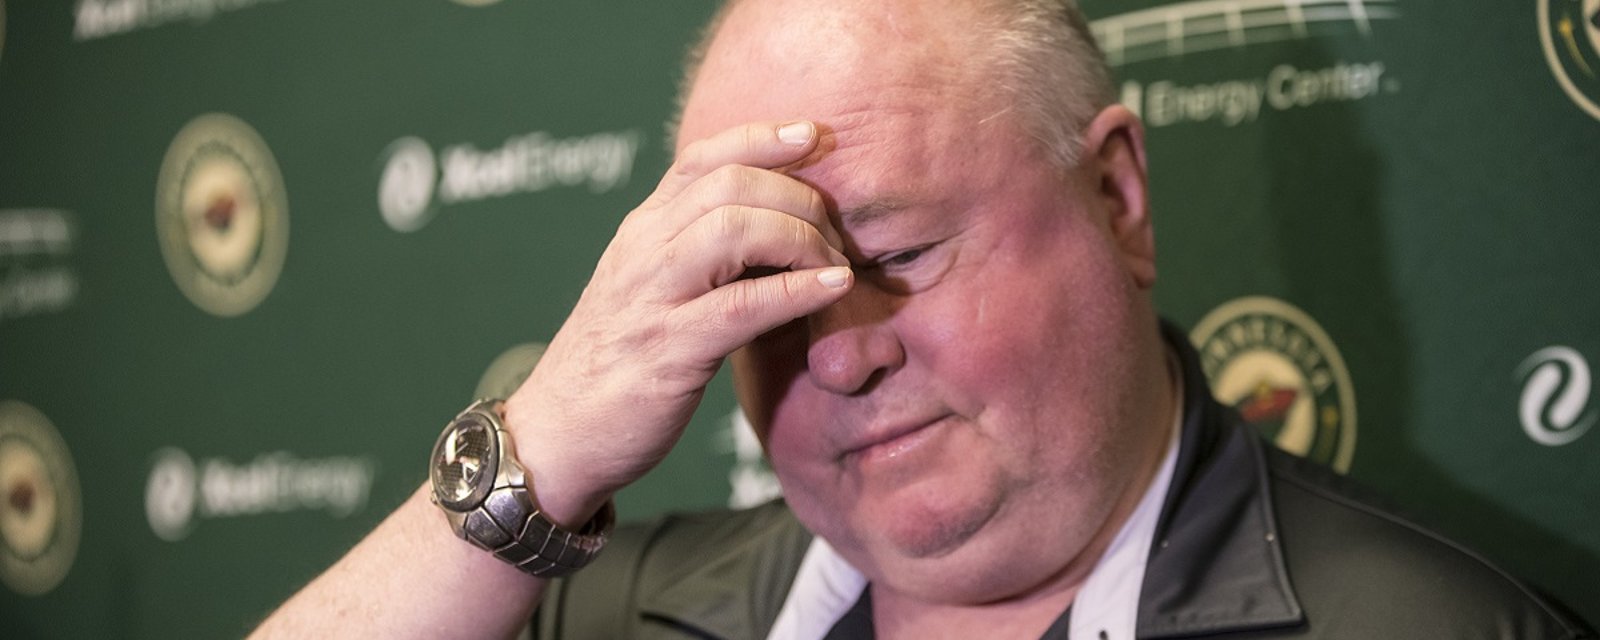 Zucker comments on Boudreau again after throwing him under the bus.